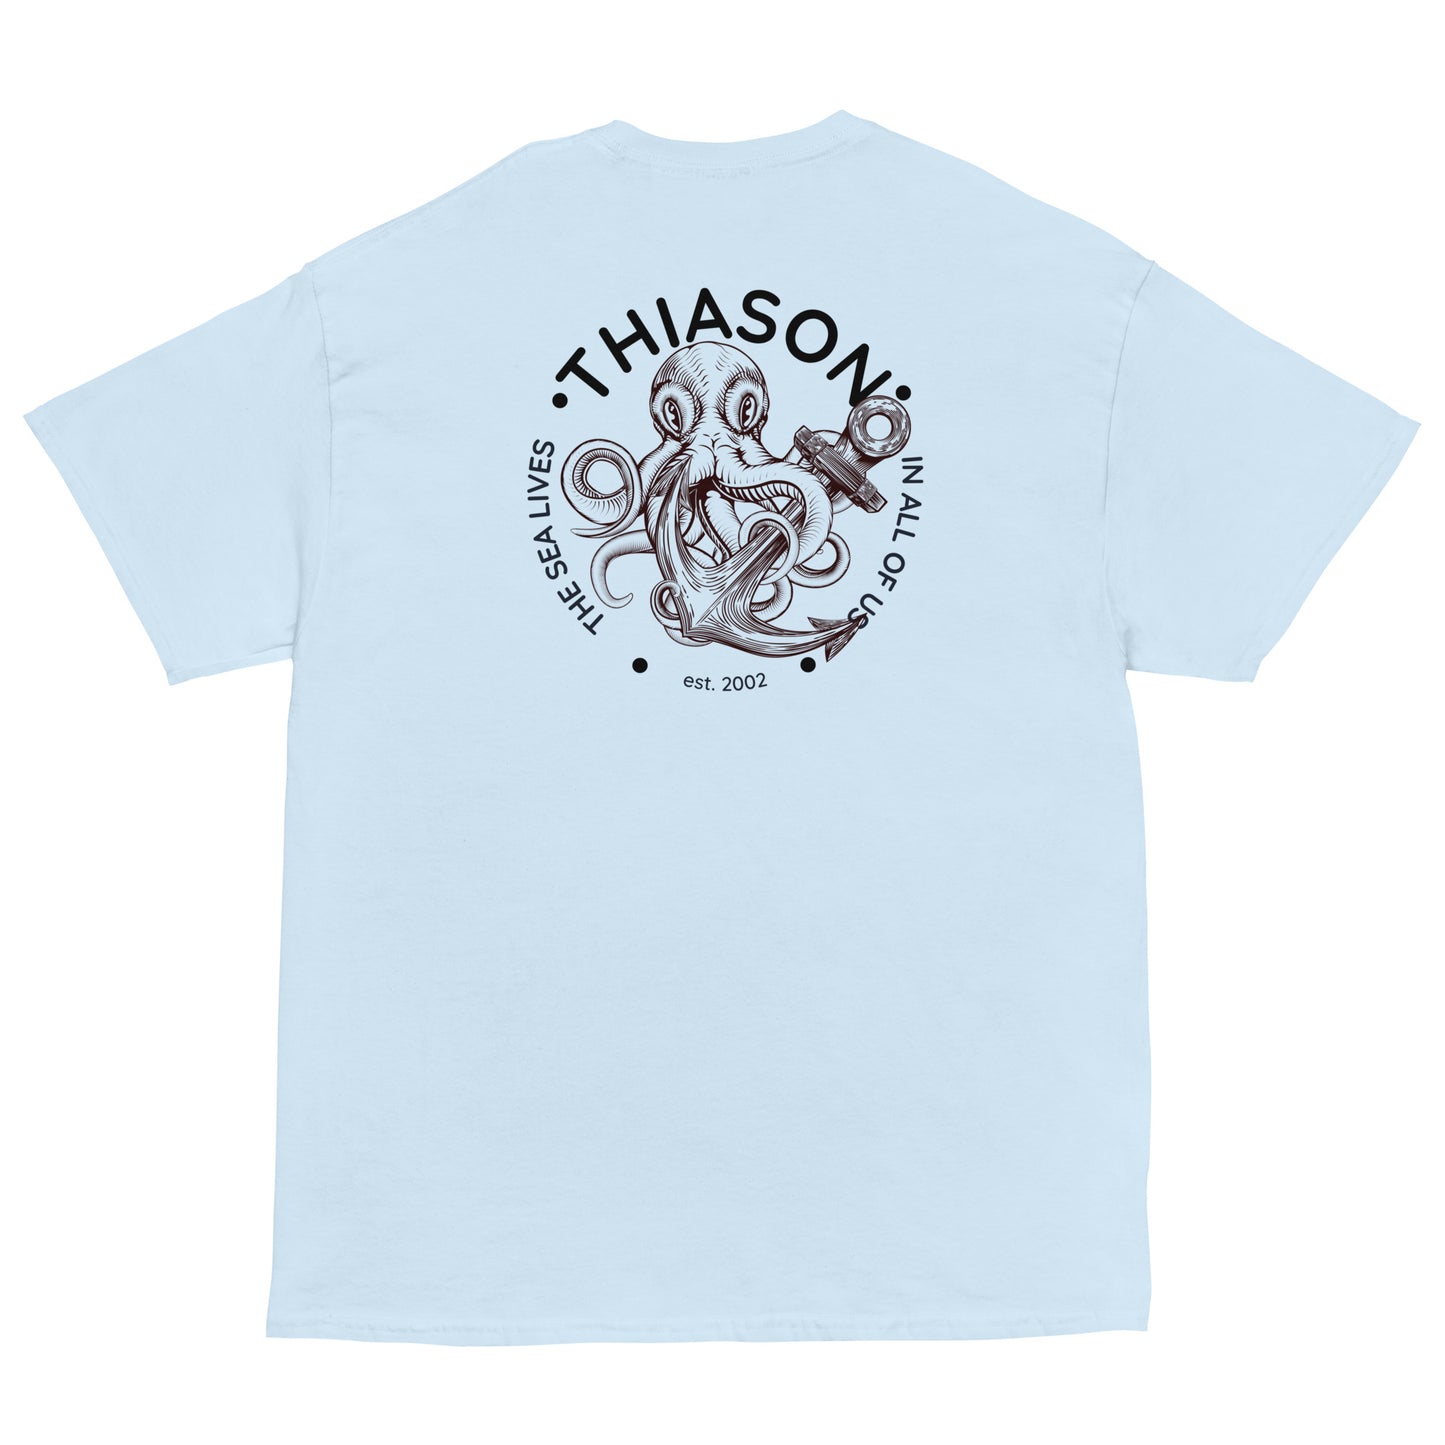 THE SEA IN ALL OF US Men's Classic Tee